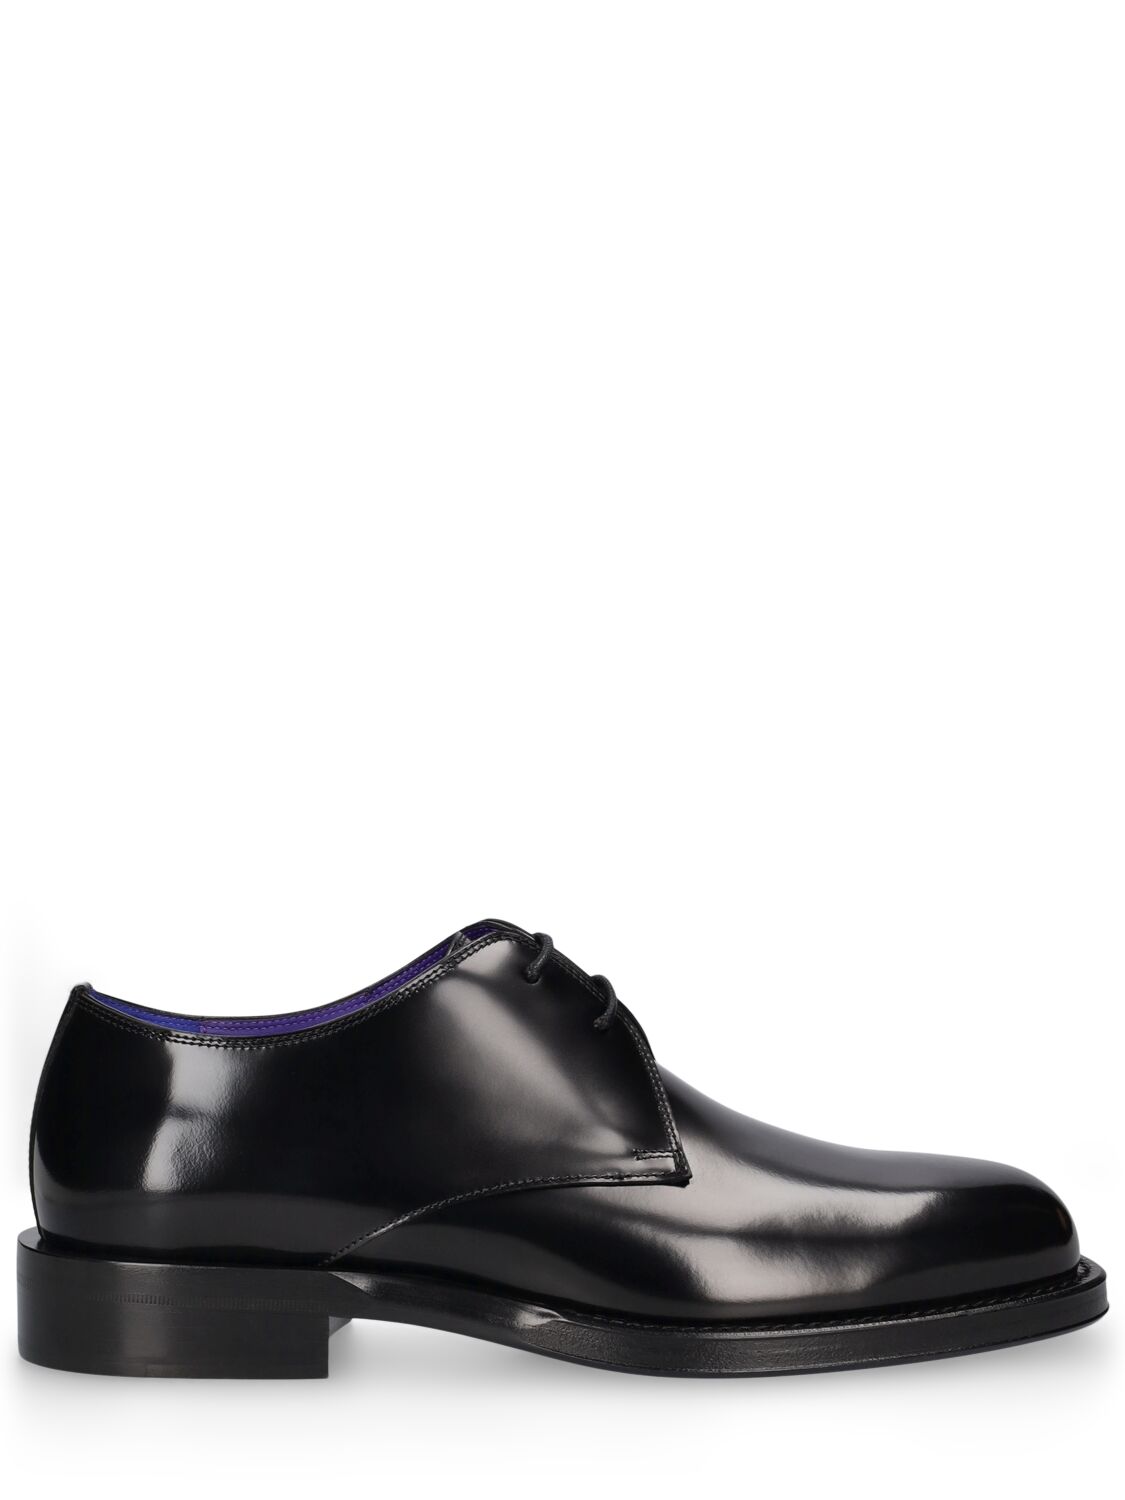 Image of Mf Tux Leather Derby Shoes